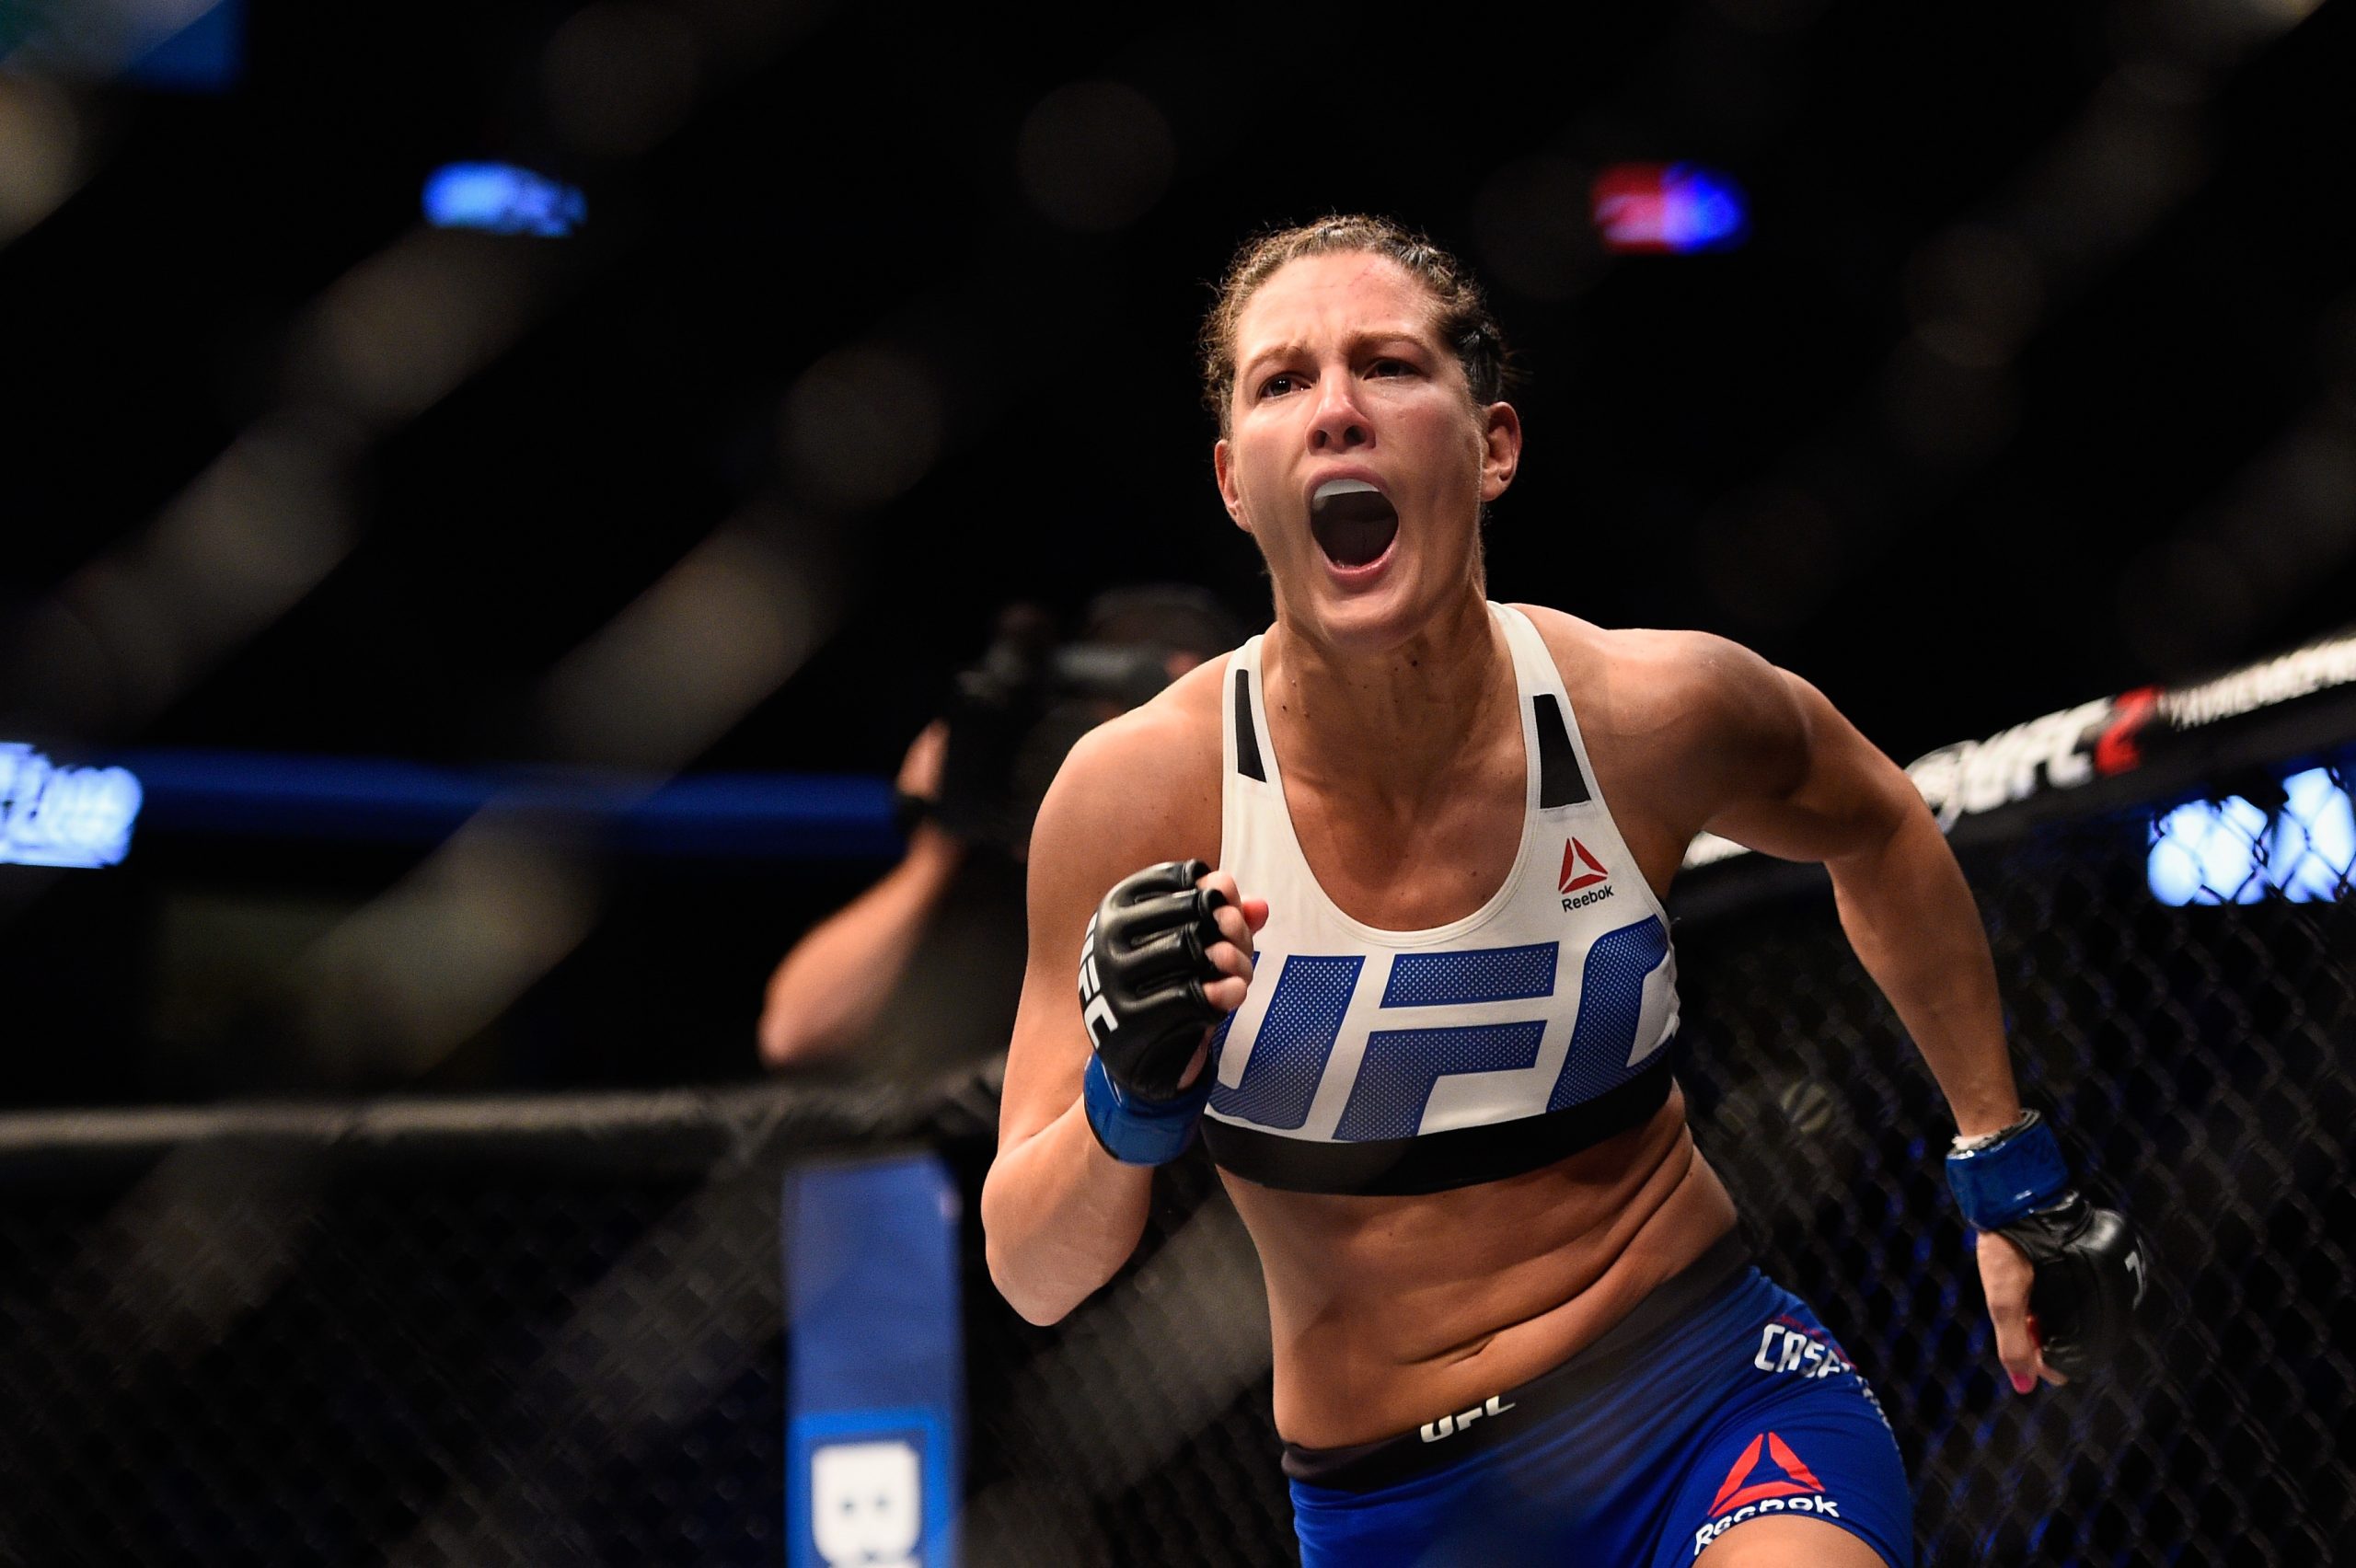 UFC's Cortney Casey fights out of Phoenix's MMA Lab and holds a 10-10 professional record in the flyweight division. (Photo by Jeff Bottari/Zuffa LLC/Zuffa LLC via Getty Images)